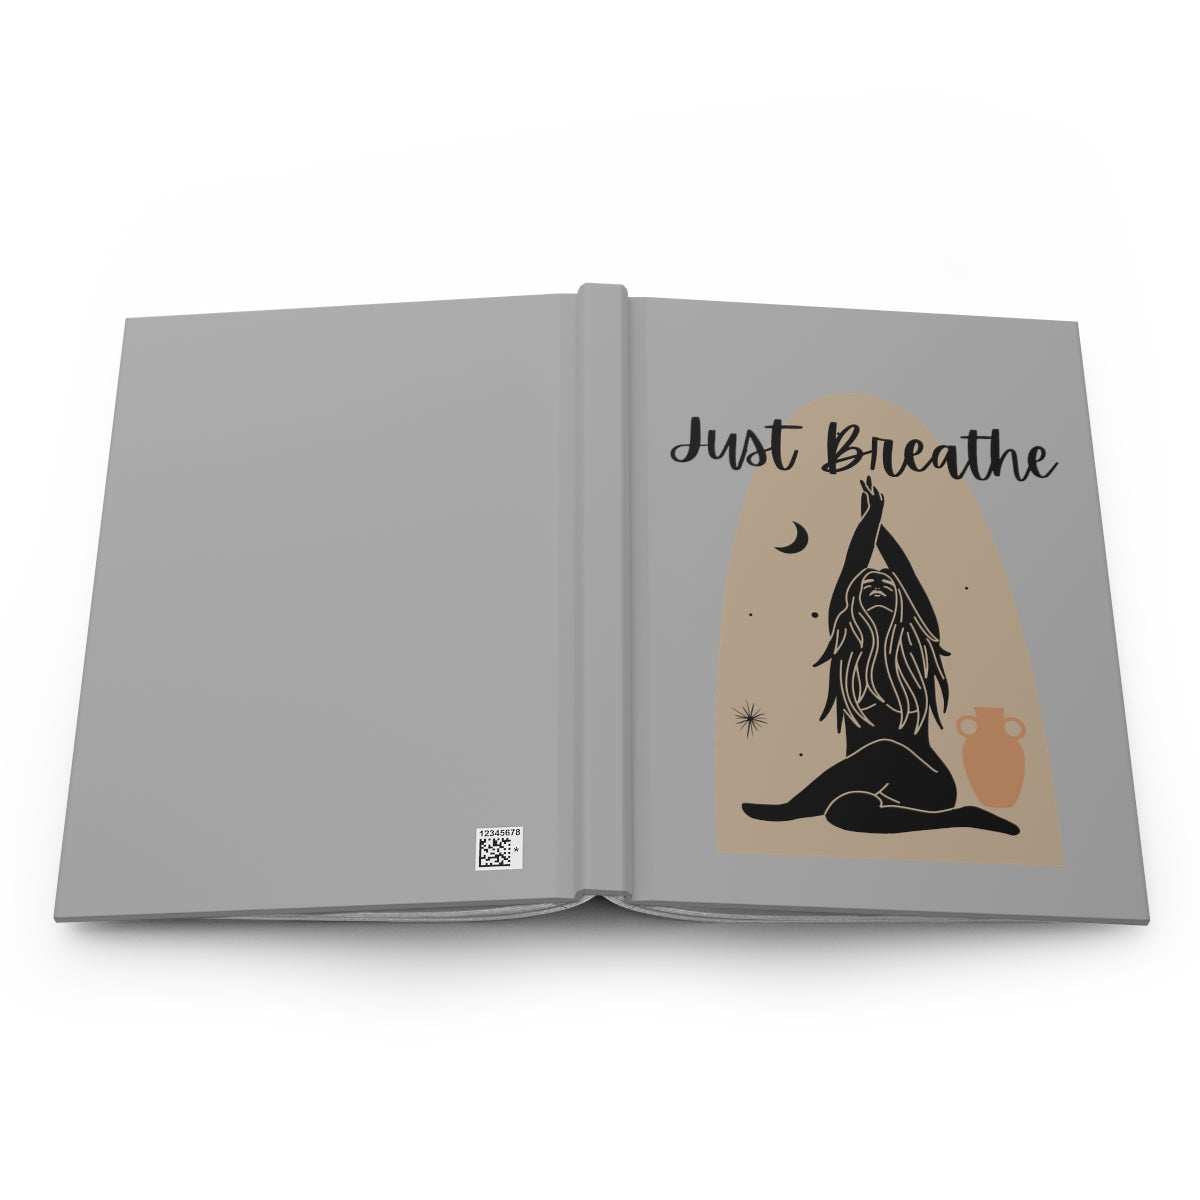 Just Breathe Notebook, Yoga Journal, Exercise Journal, Hard Cover Notebook, Dotted Paper Journal, Yoga, Lined Notebook, Lined Journal - The Good Life Vibe